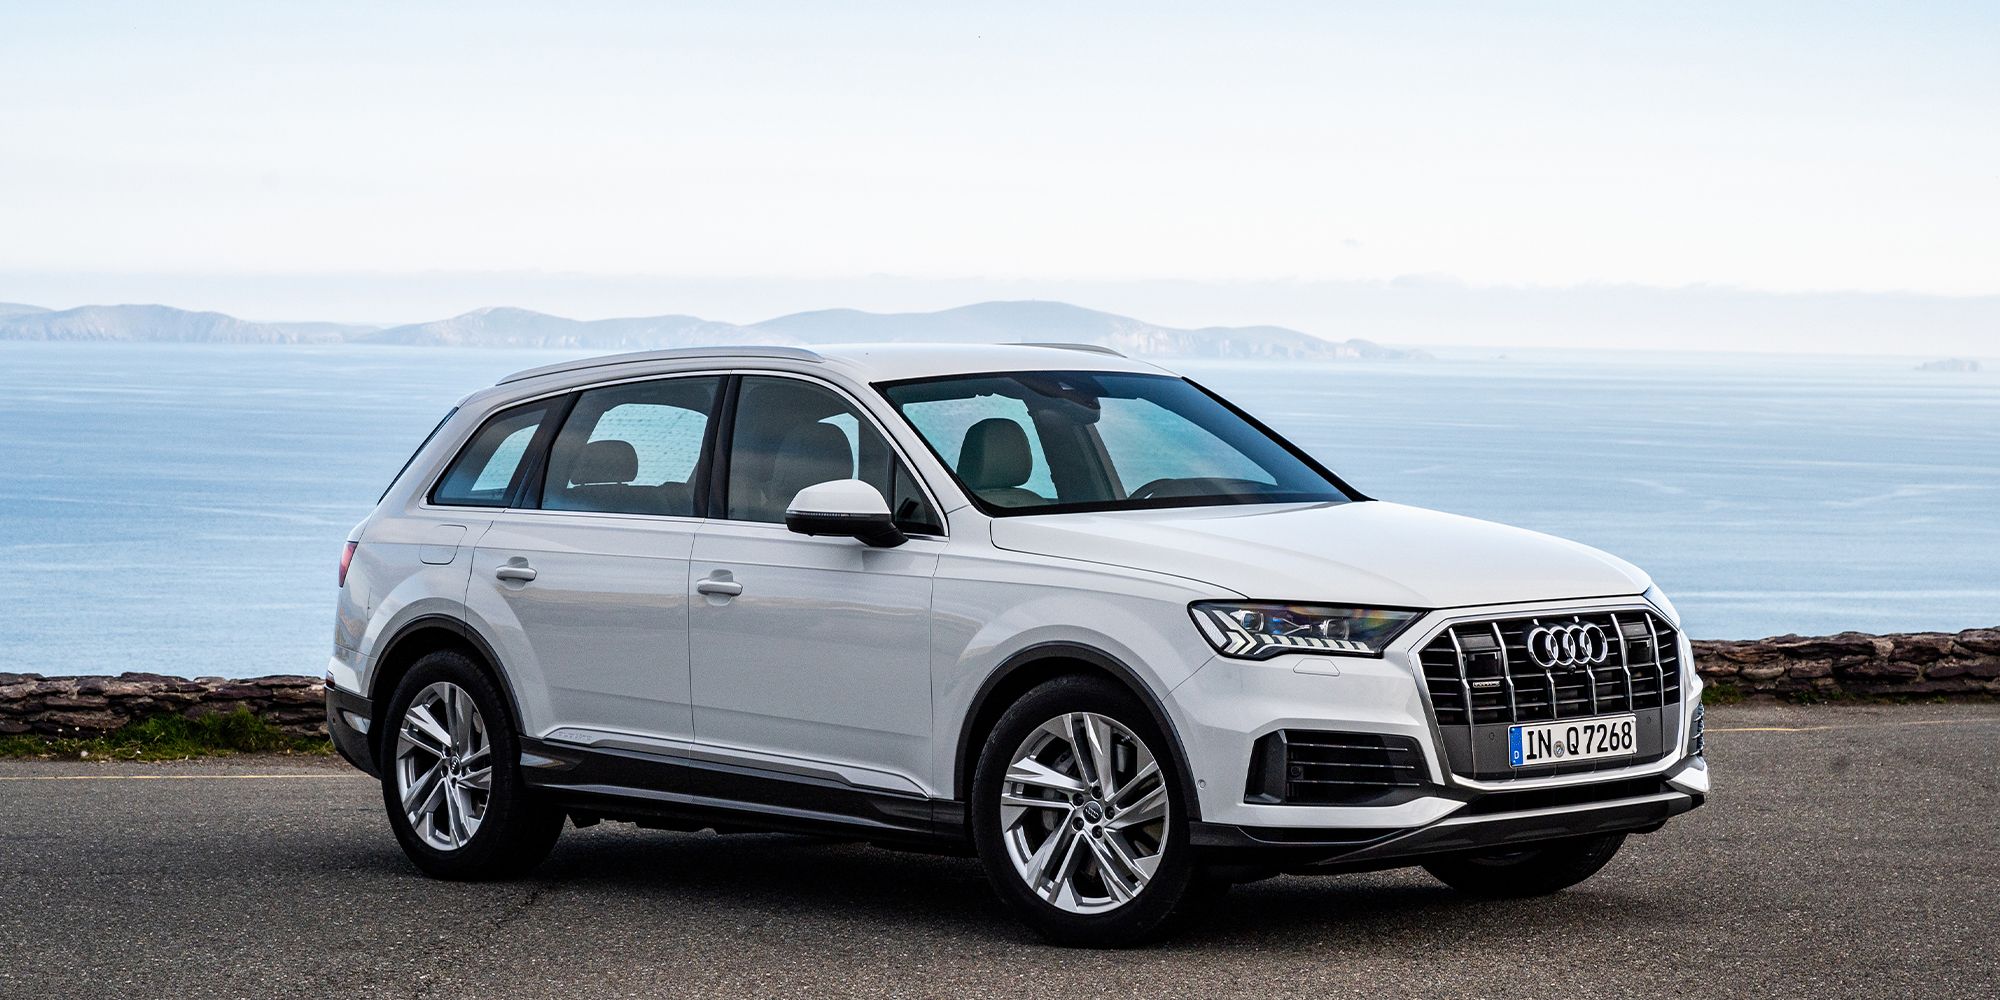 Front 3/4 view of a base model Audi Q7